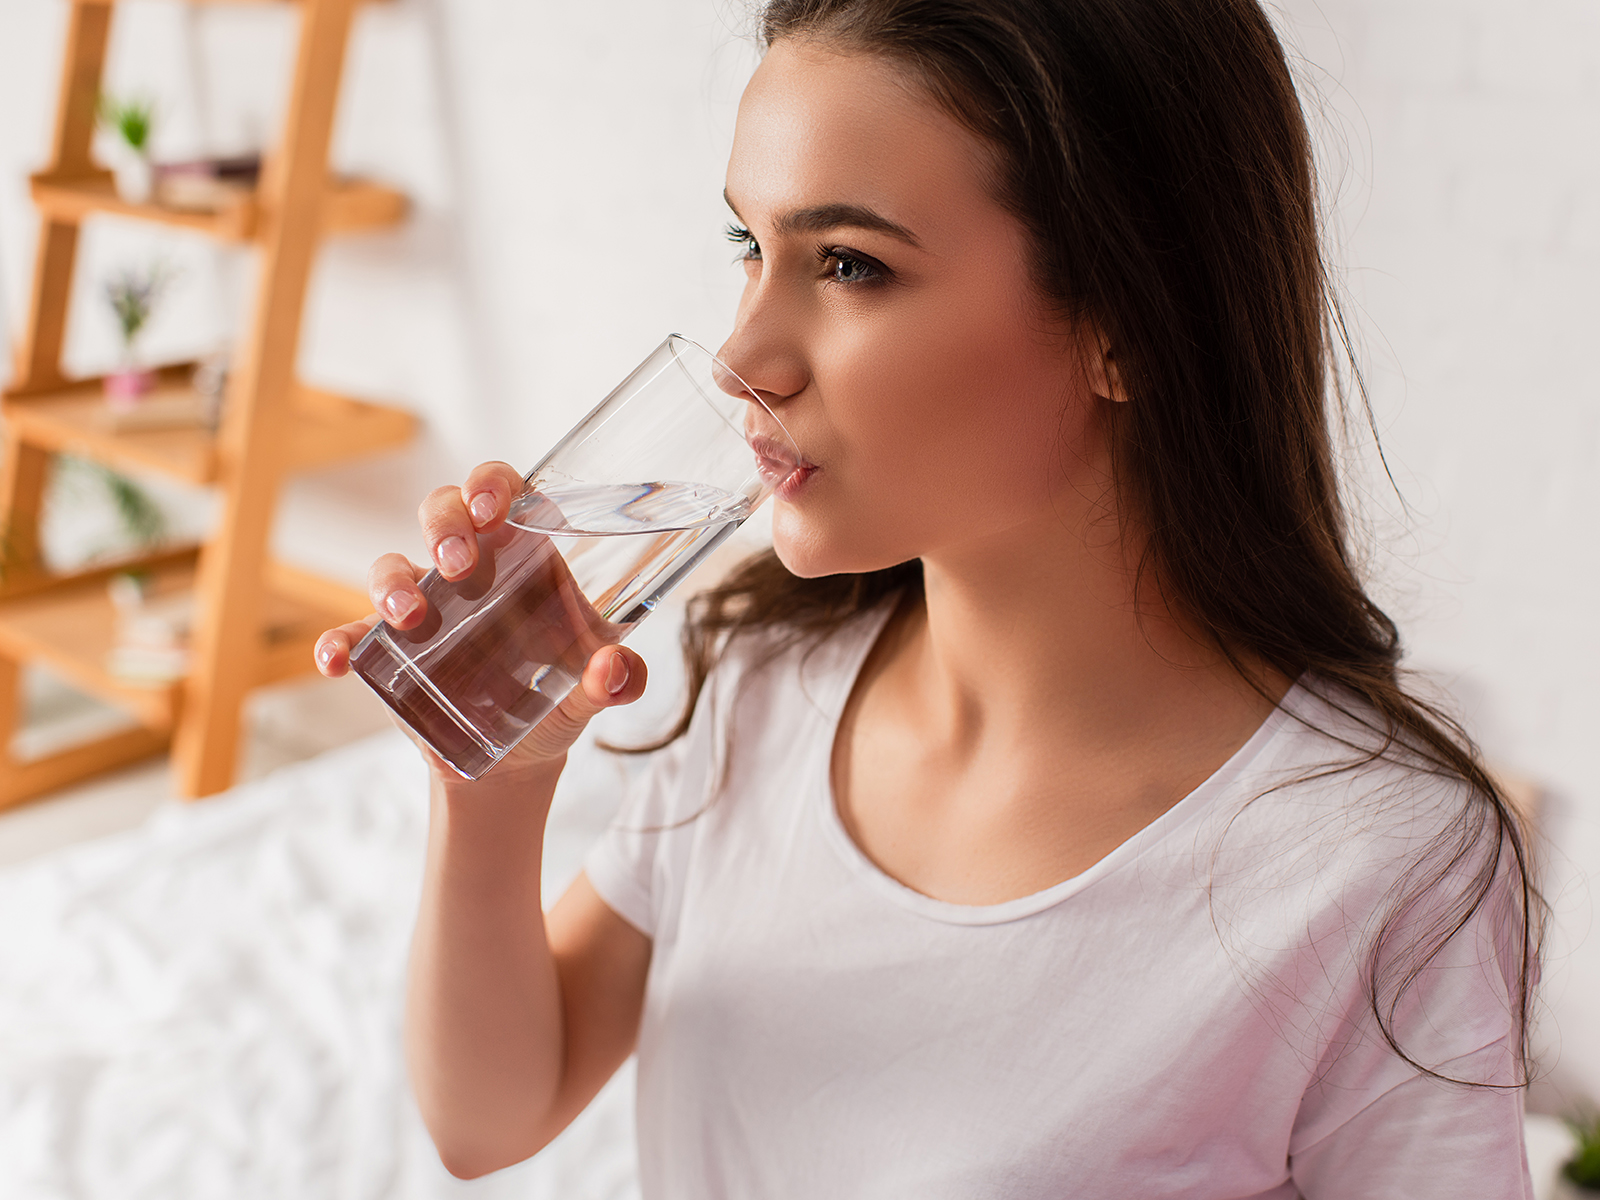 Does Drinking Water Improve Oral Health?